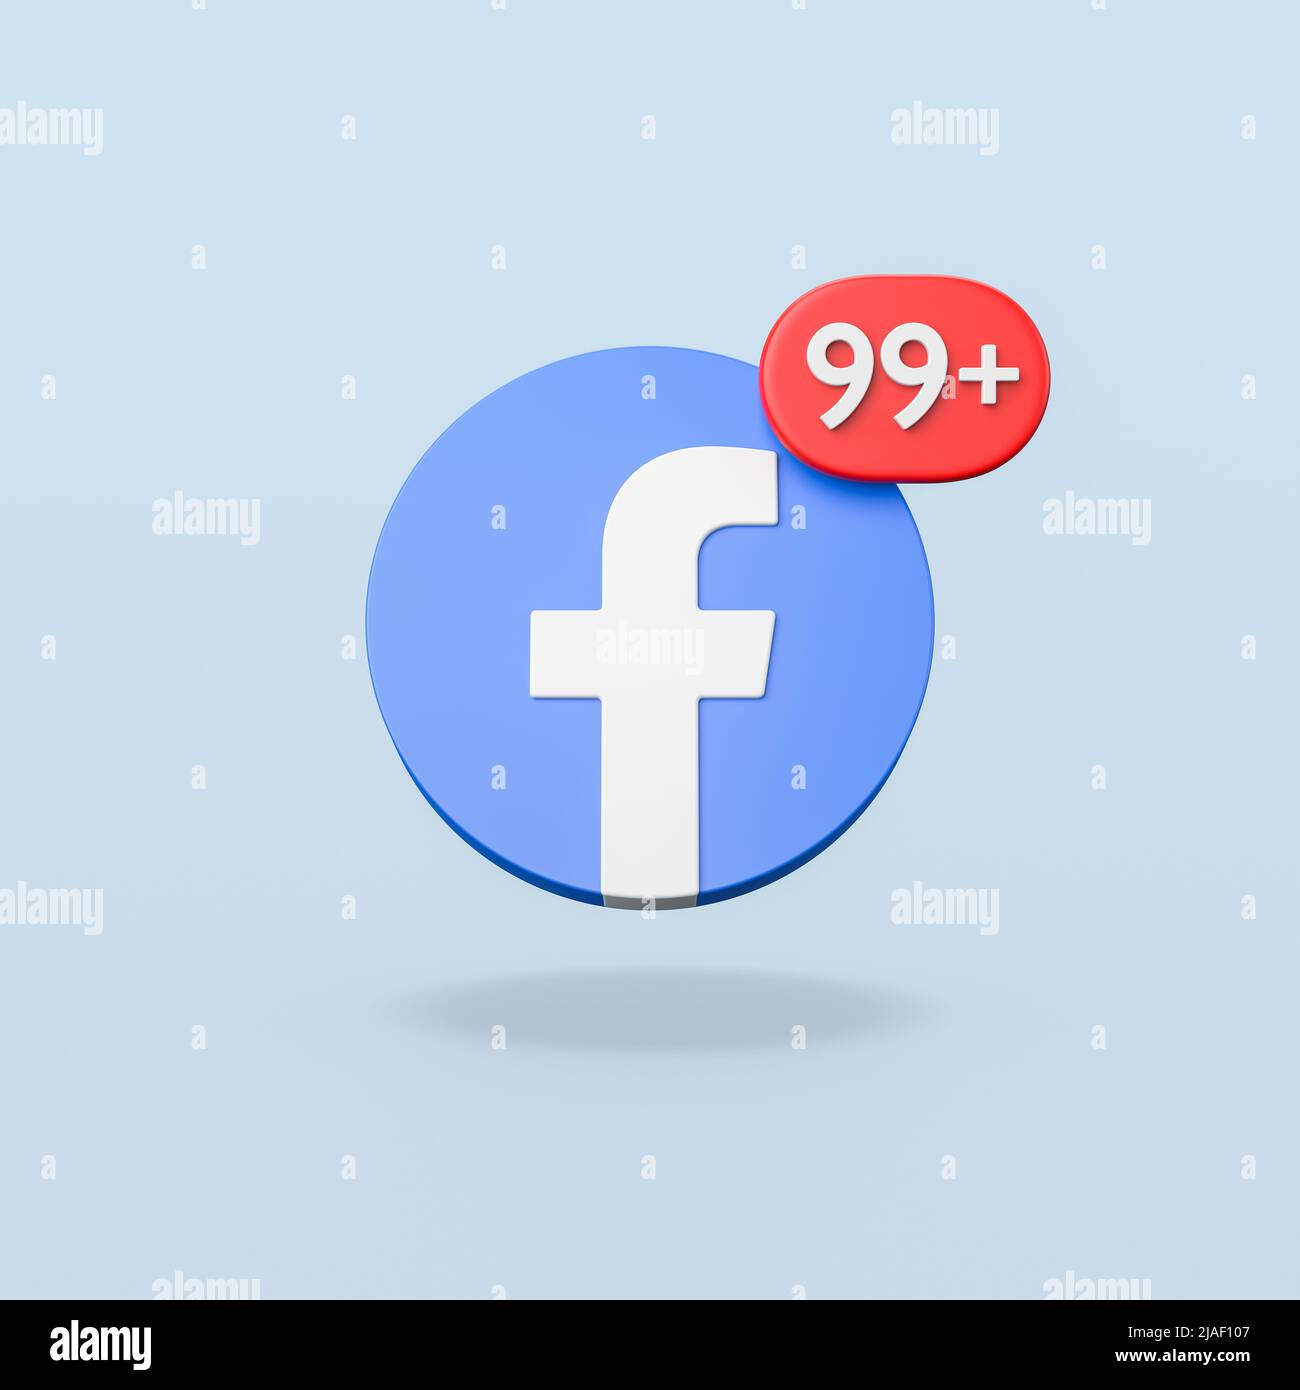 Facebook Logo with 99 Notification on Blue Background Stock Photo